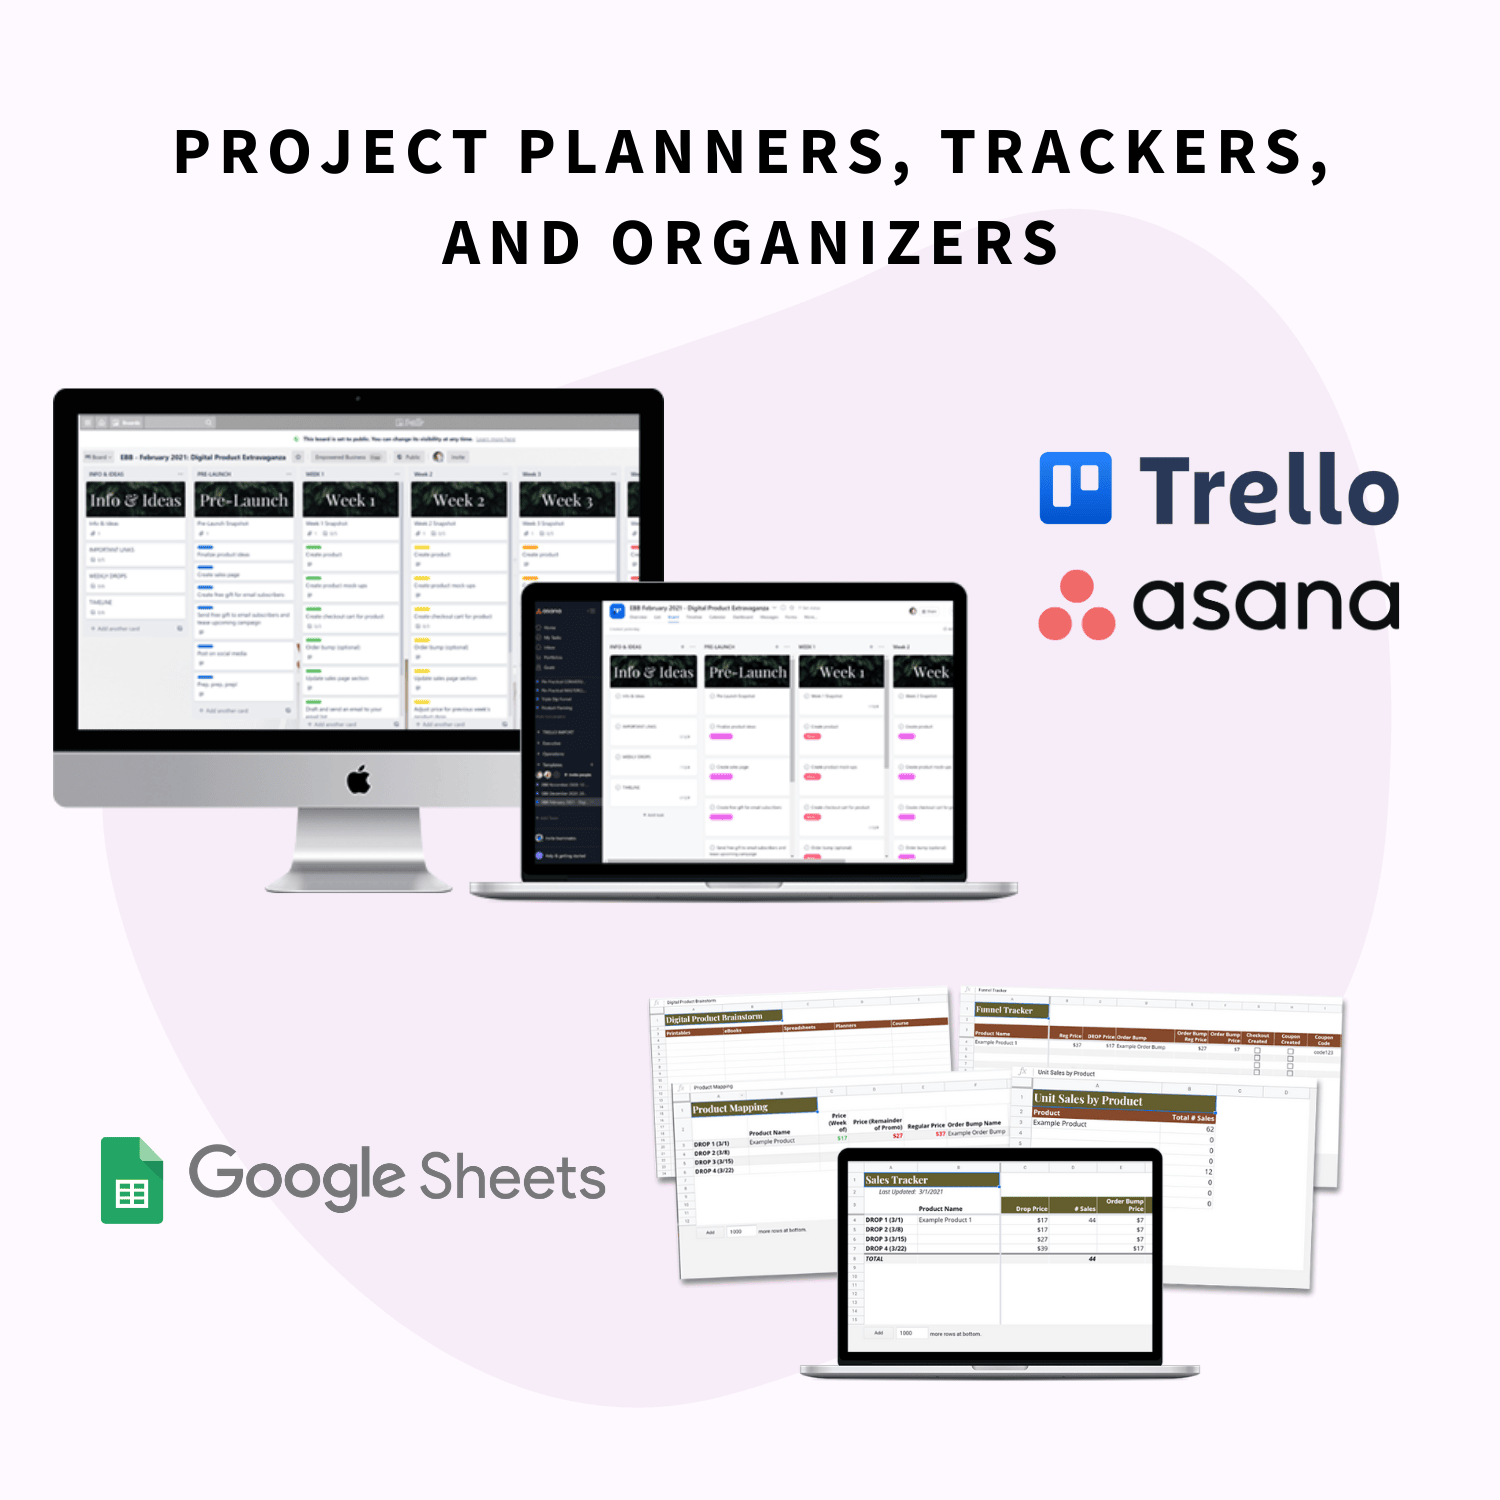 Project planners, trackers, and organizers in trello, asana, and google sheets in the Digital Product Extravaganza Toolbox